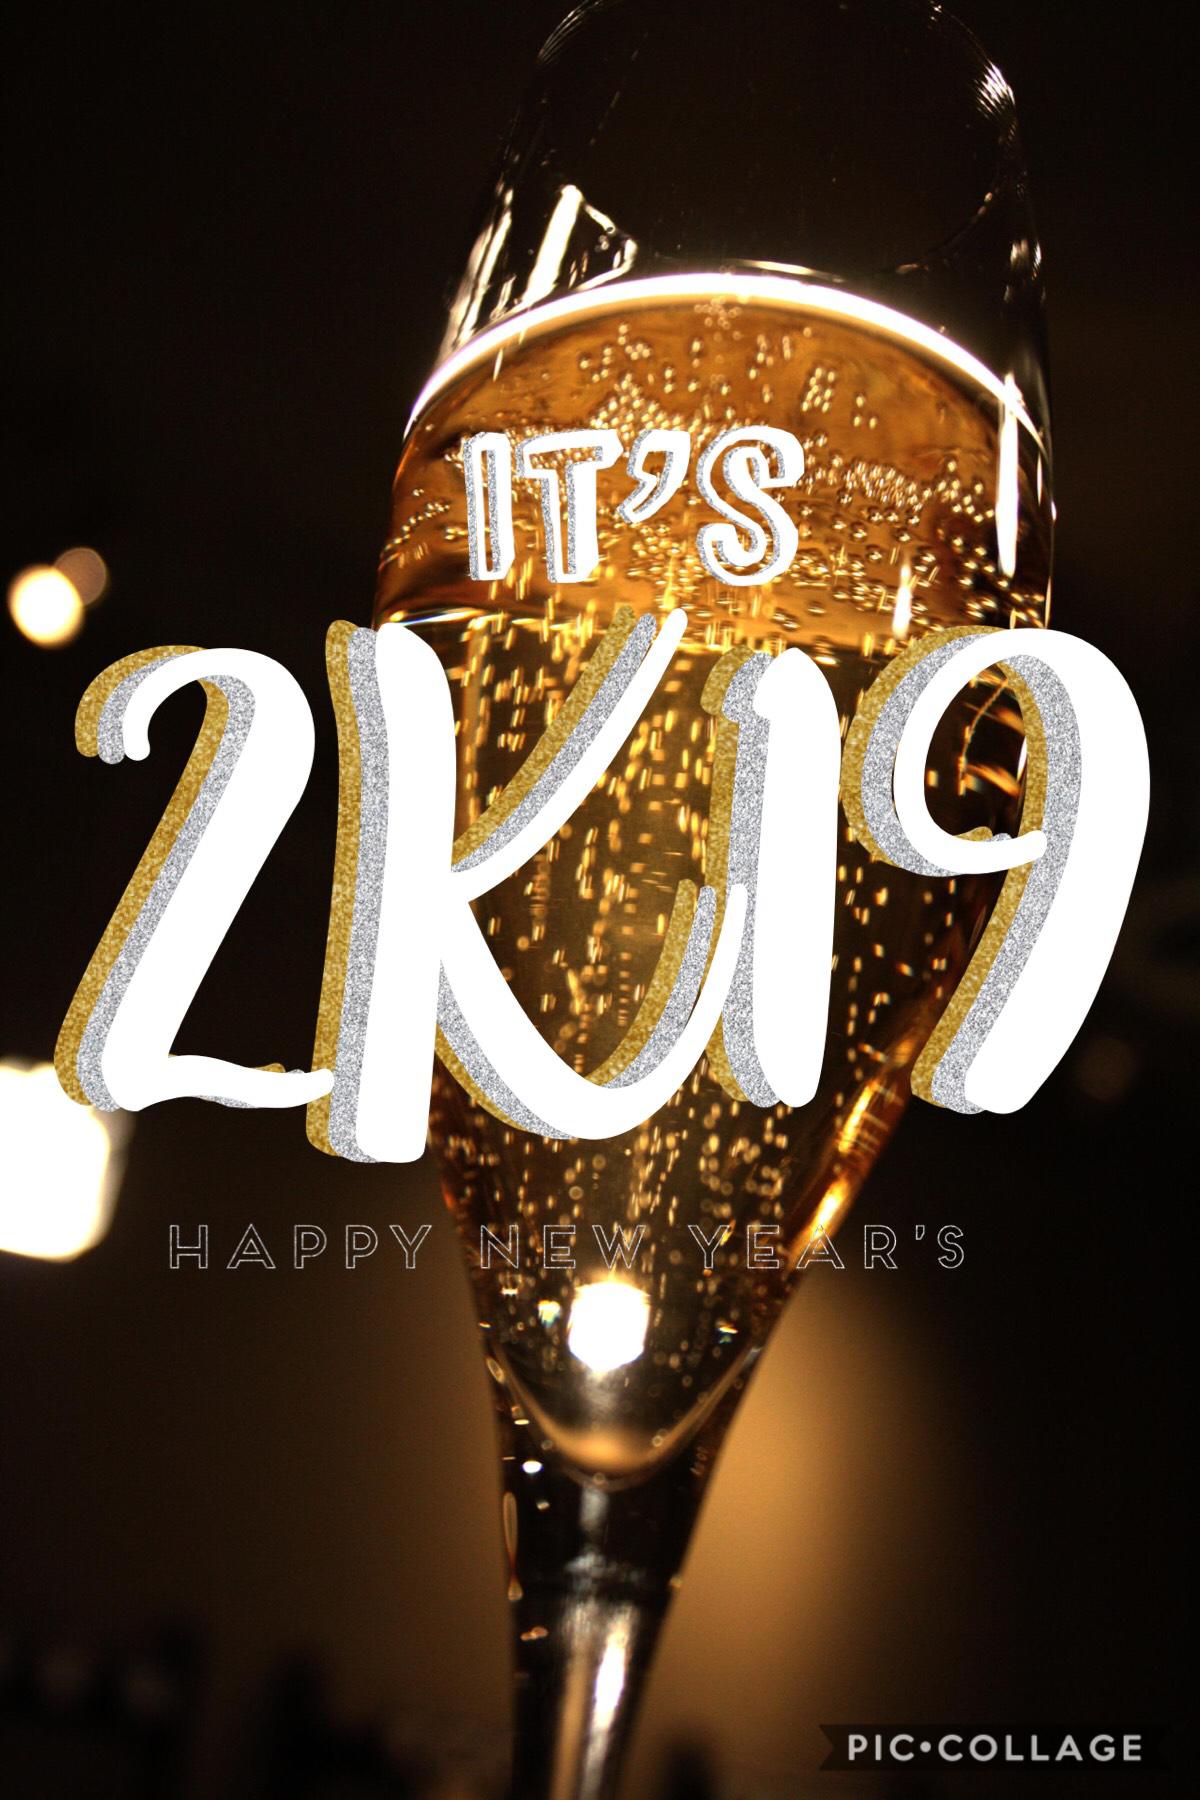 Happy New Years
Have a Great 2019!